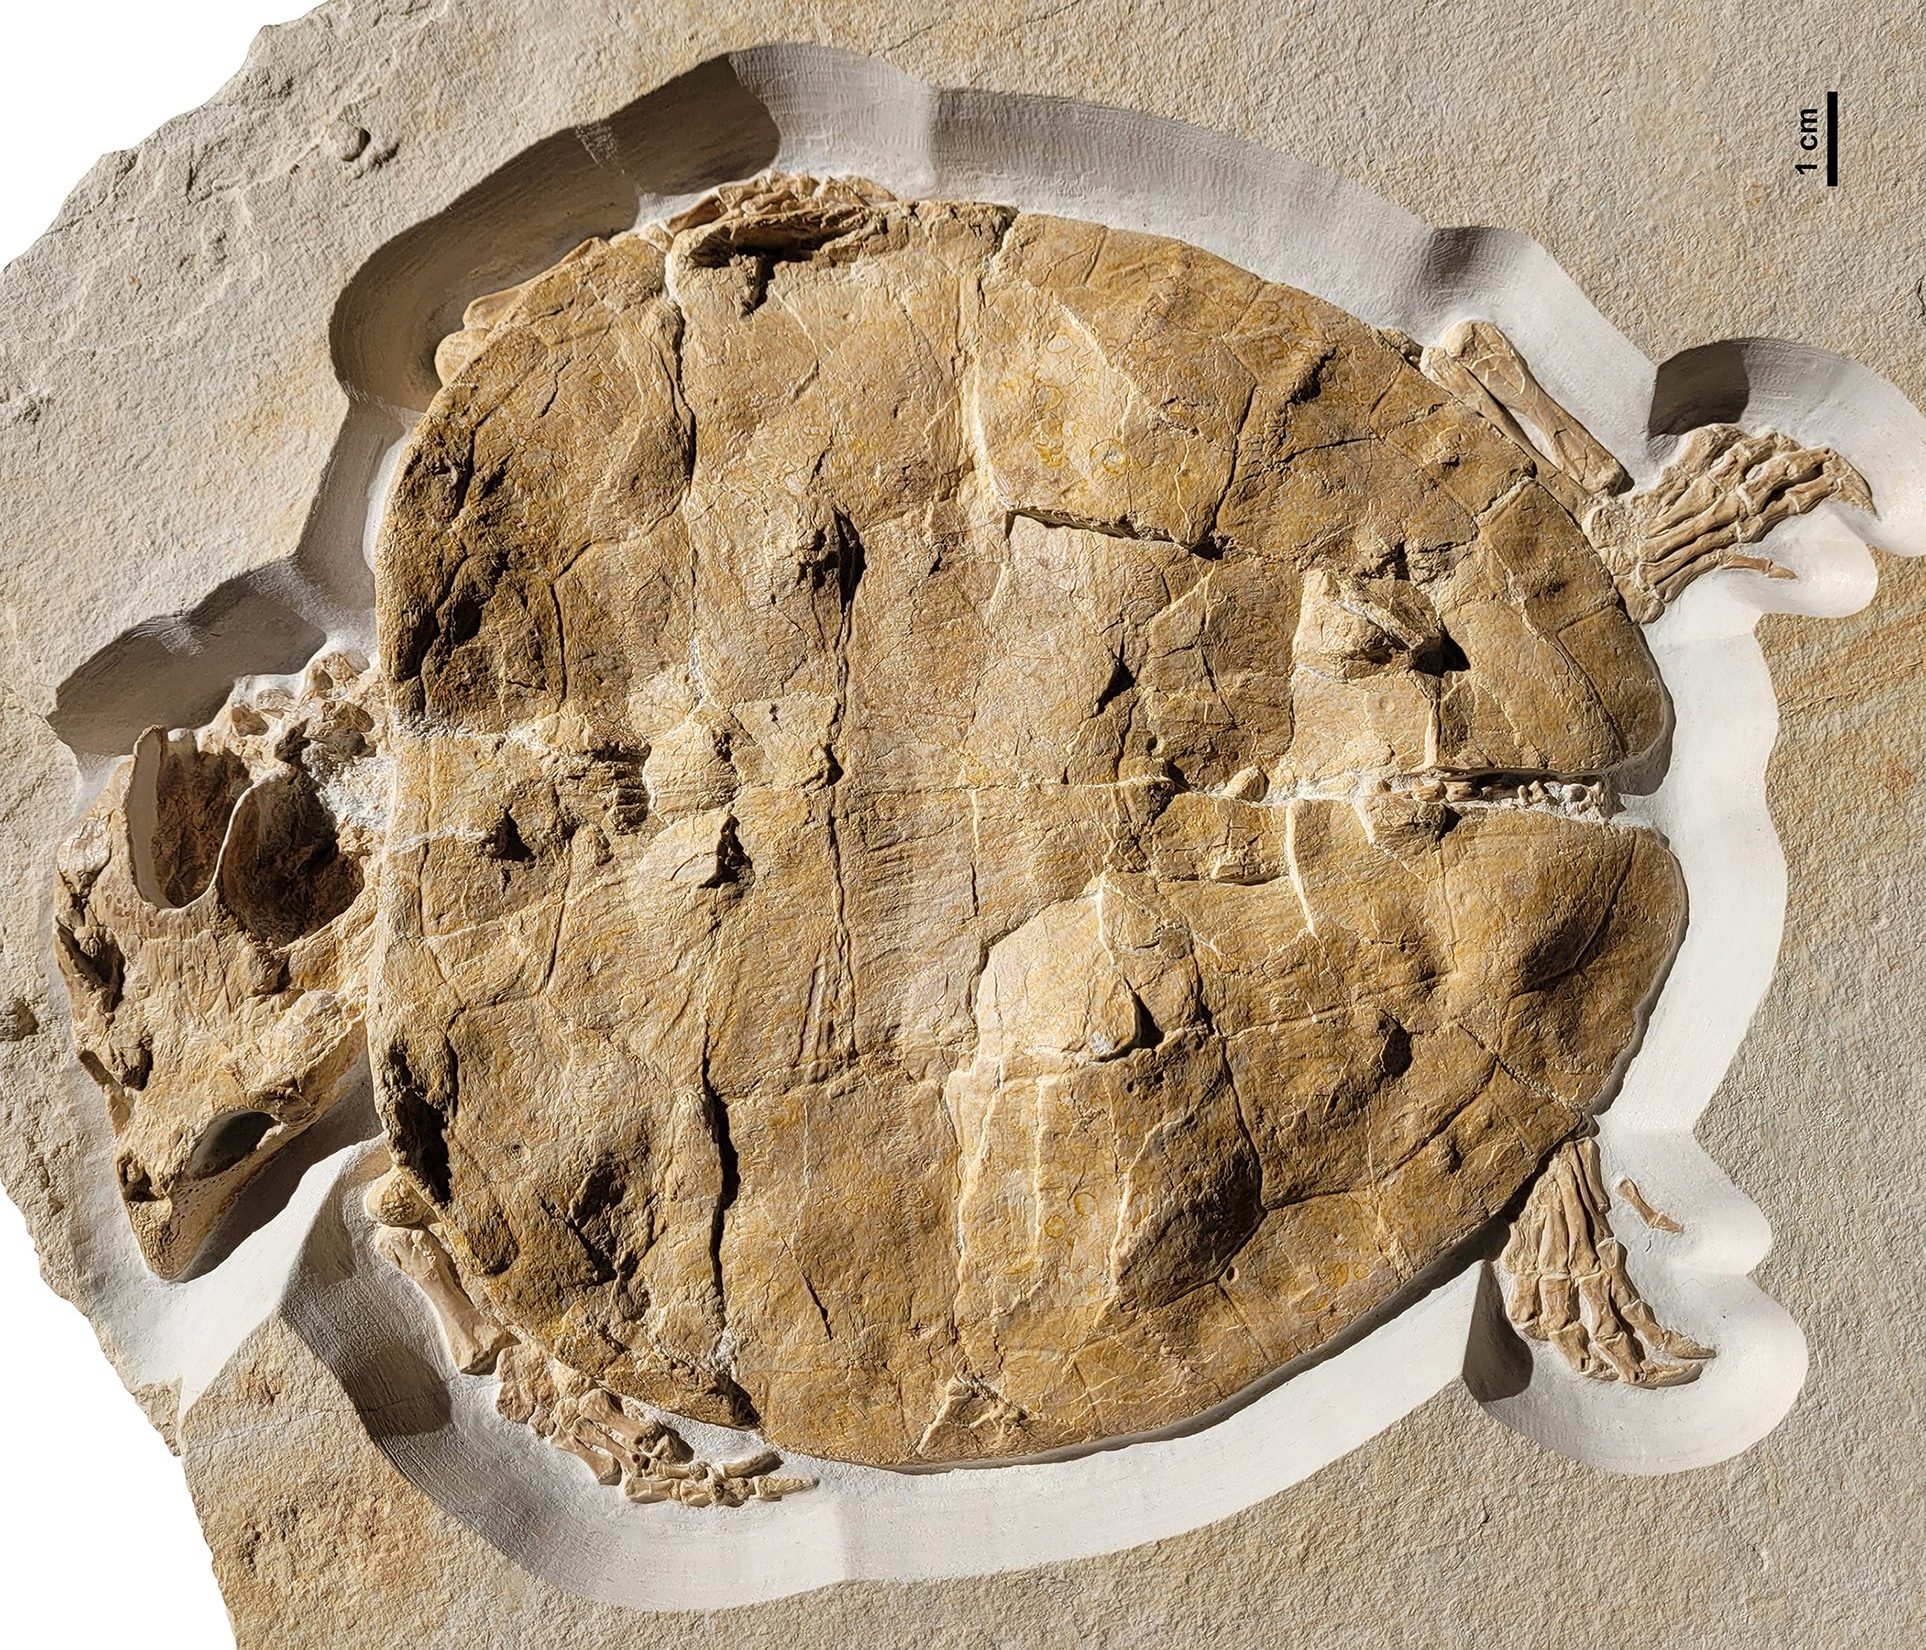 Perfectly preserved turtle fossil. Credit: PLOS ONE (2023). DOI: 10.1371/journal.pone.0287936